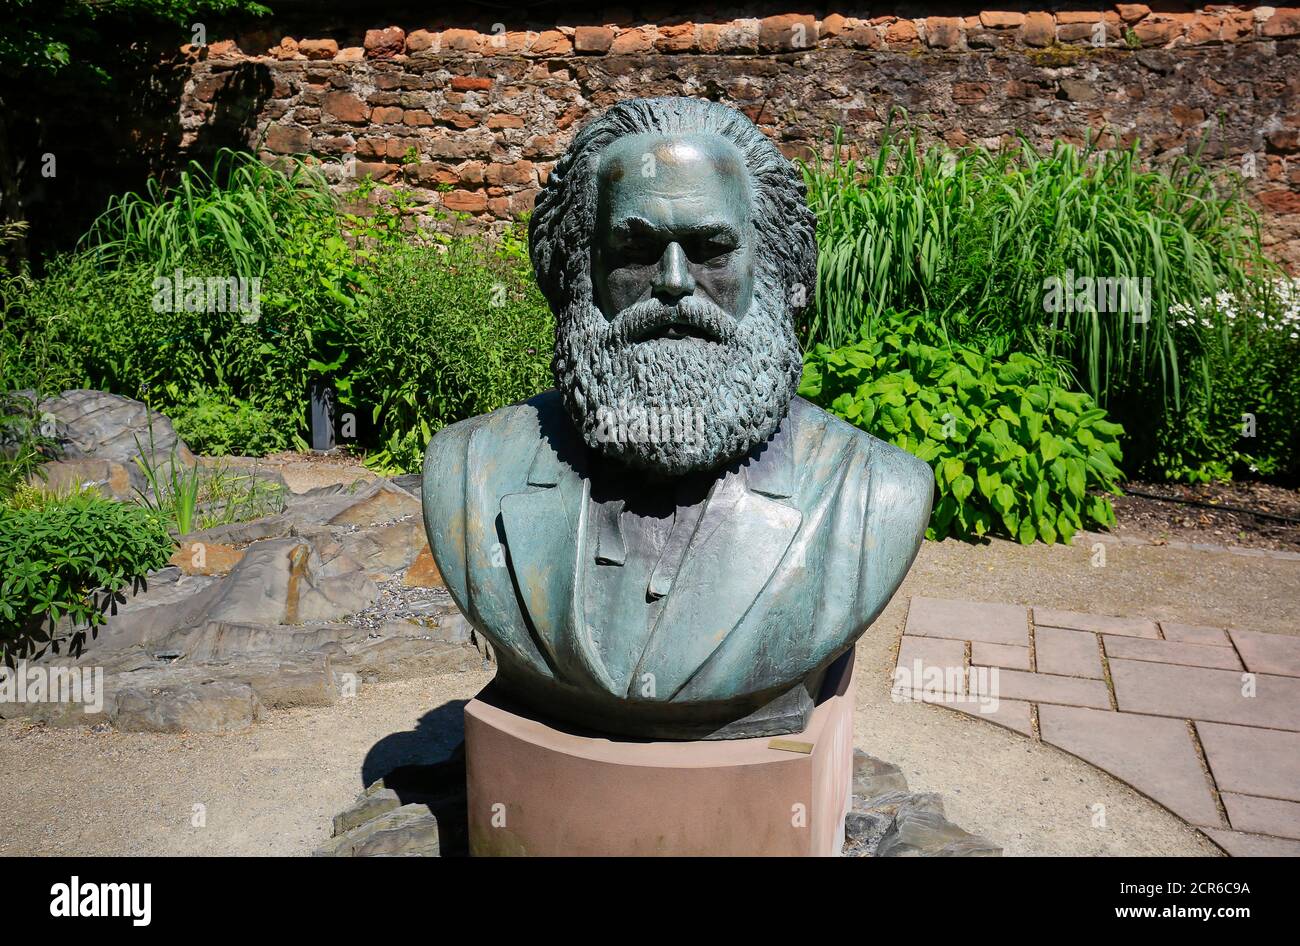 Bust of Karl Marx in the garden of the Karl Marx House, birthplace of Karl Marx, Trier, Rhineland-Palatinate, Germany, Europe Stock Photo